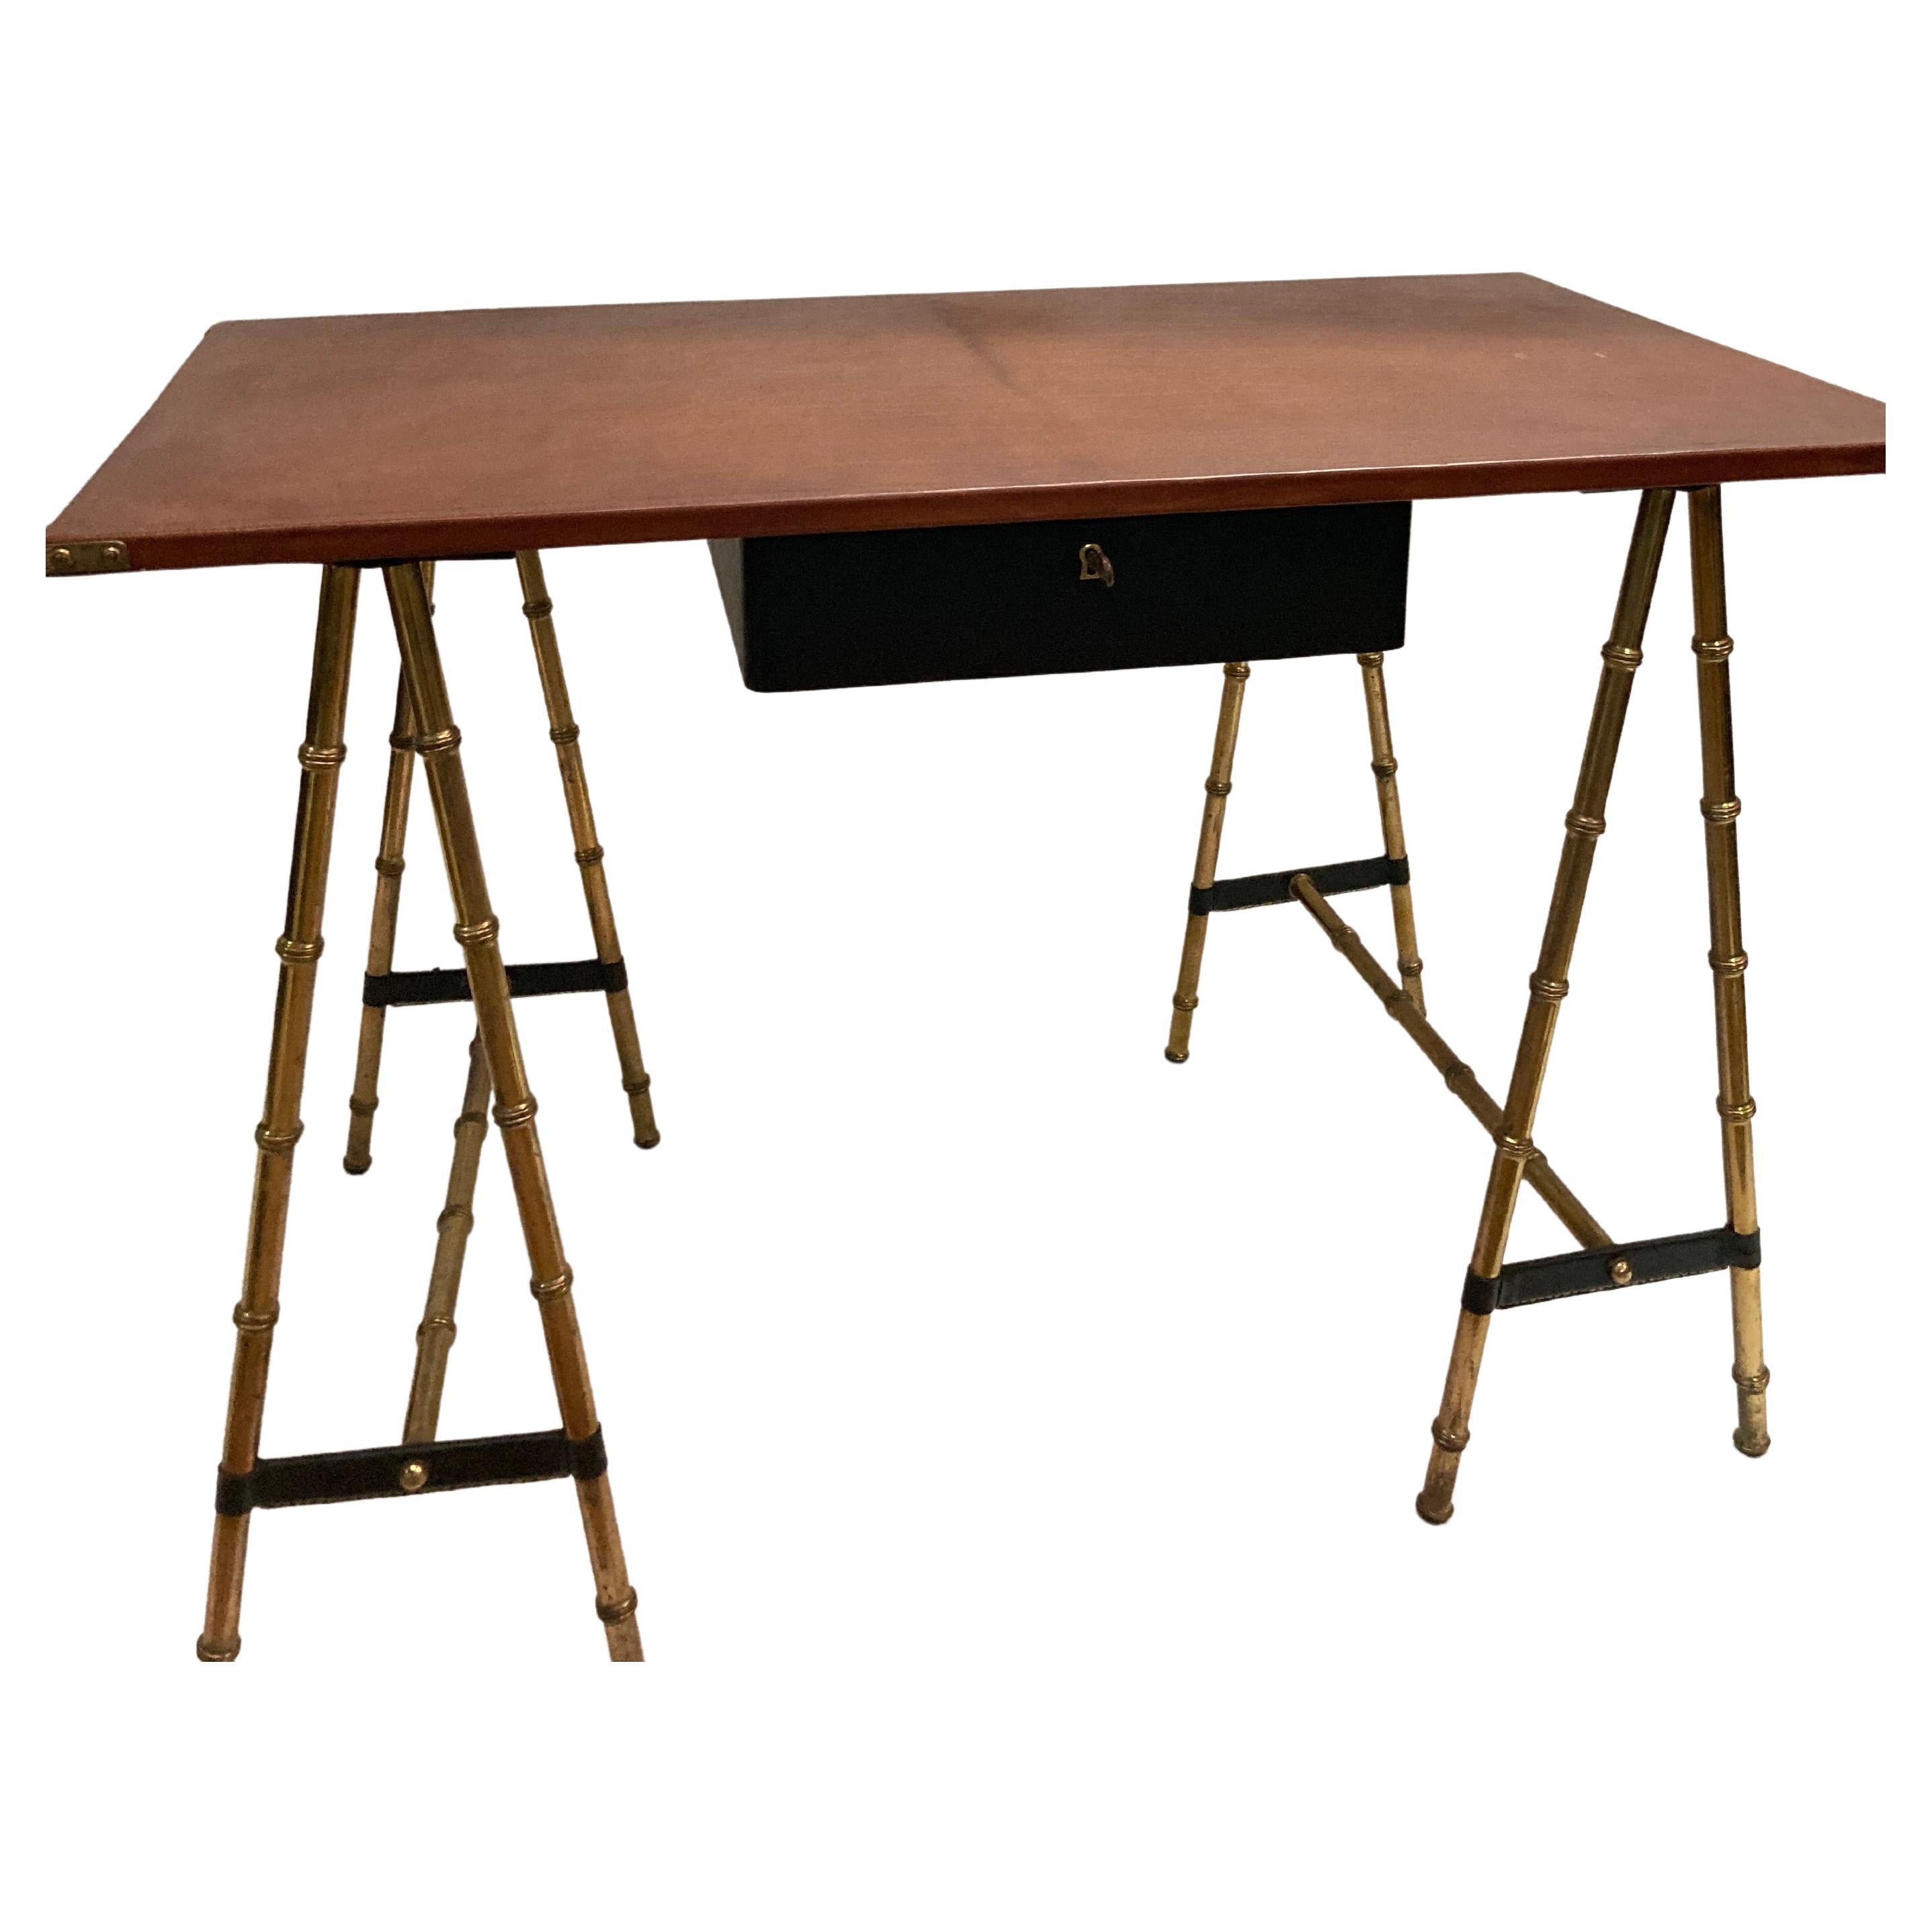 1950's Stitched leather desk by Jacques Adnet For Sale